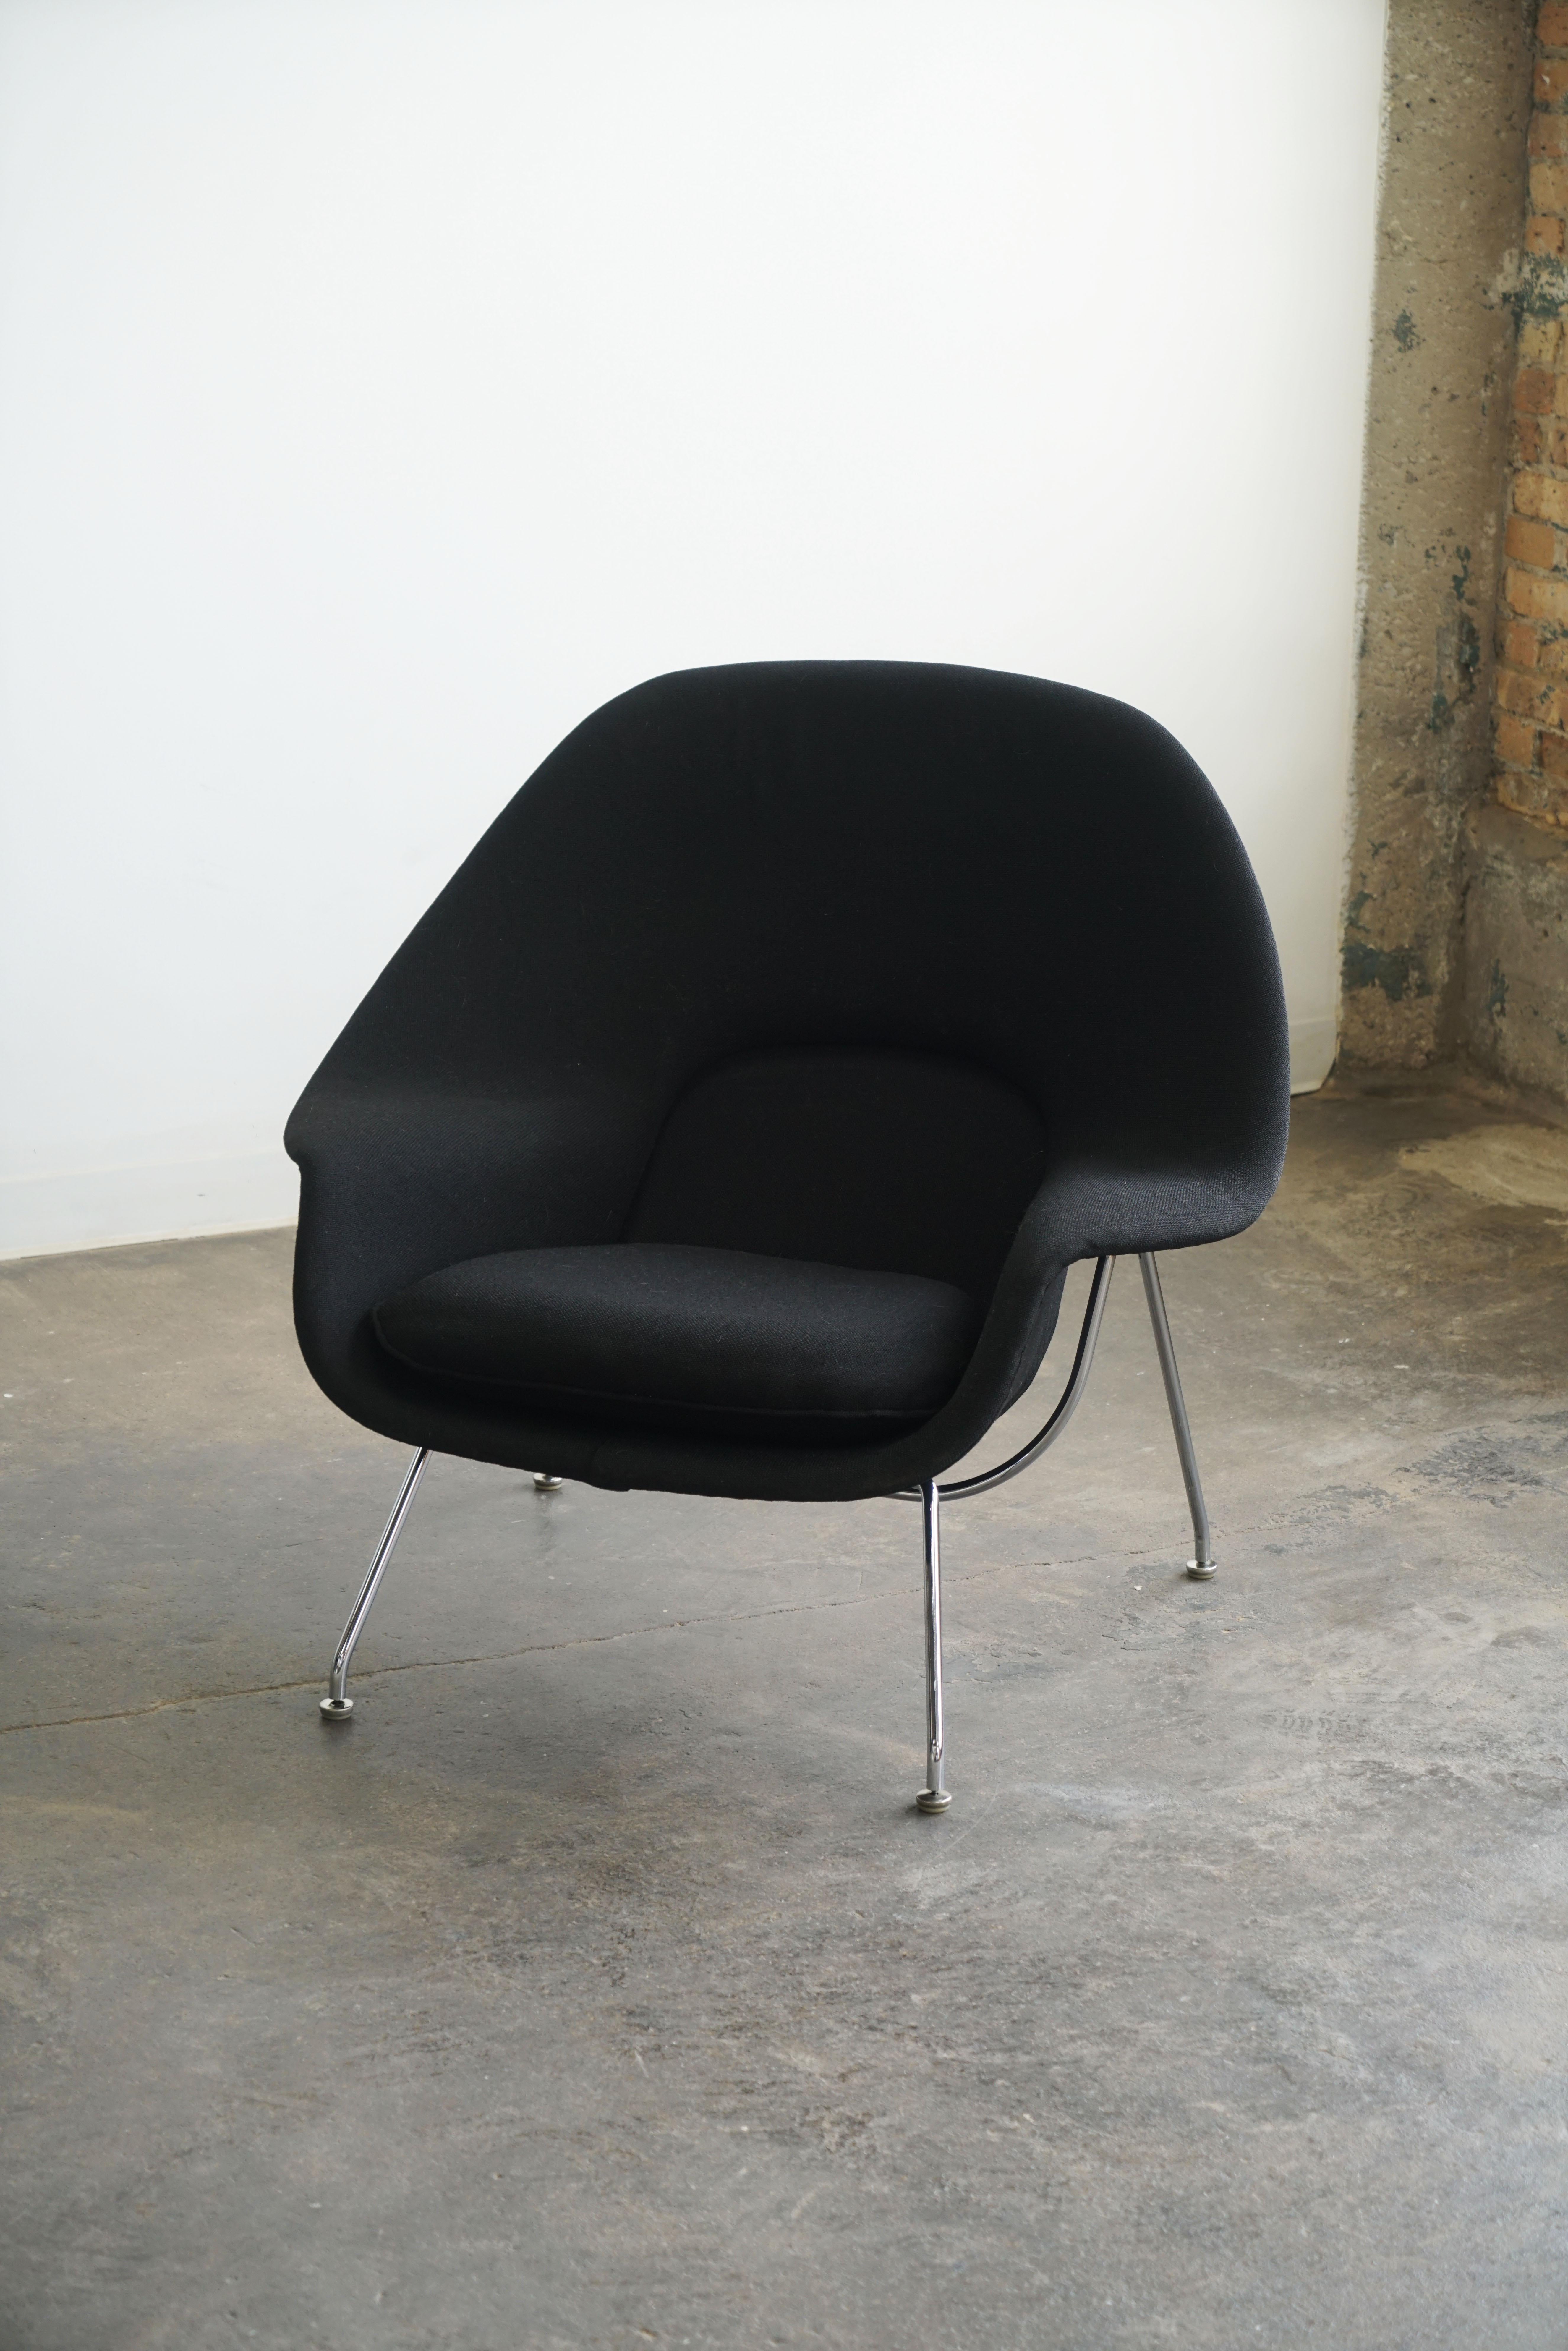 Early Womb Chair by Eero Saarinen for Knoll International.
Circa 1968.

PLEASE NOTE: This chair is being sold without a back cushion. Still an extremely comfortable chair.

Remnants of manufacturer's label to underside of chrome frame ‘Knoll